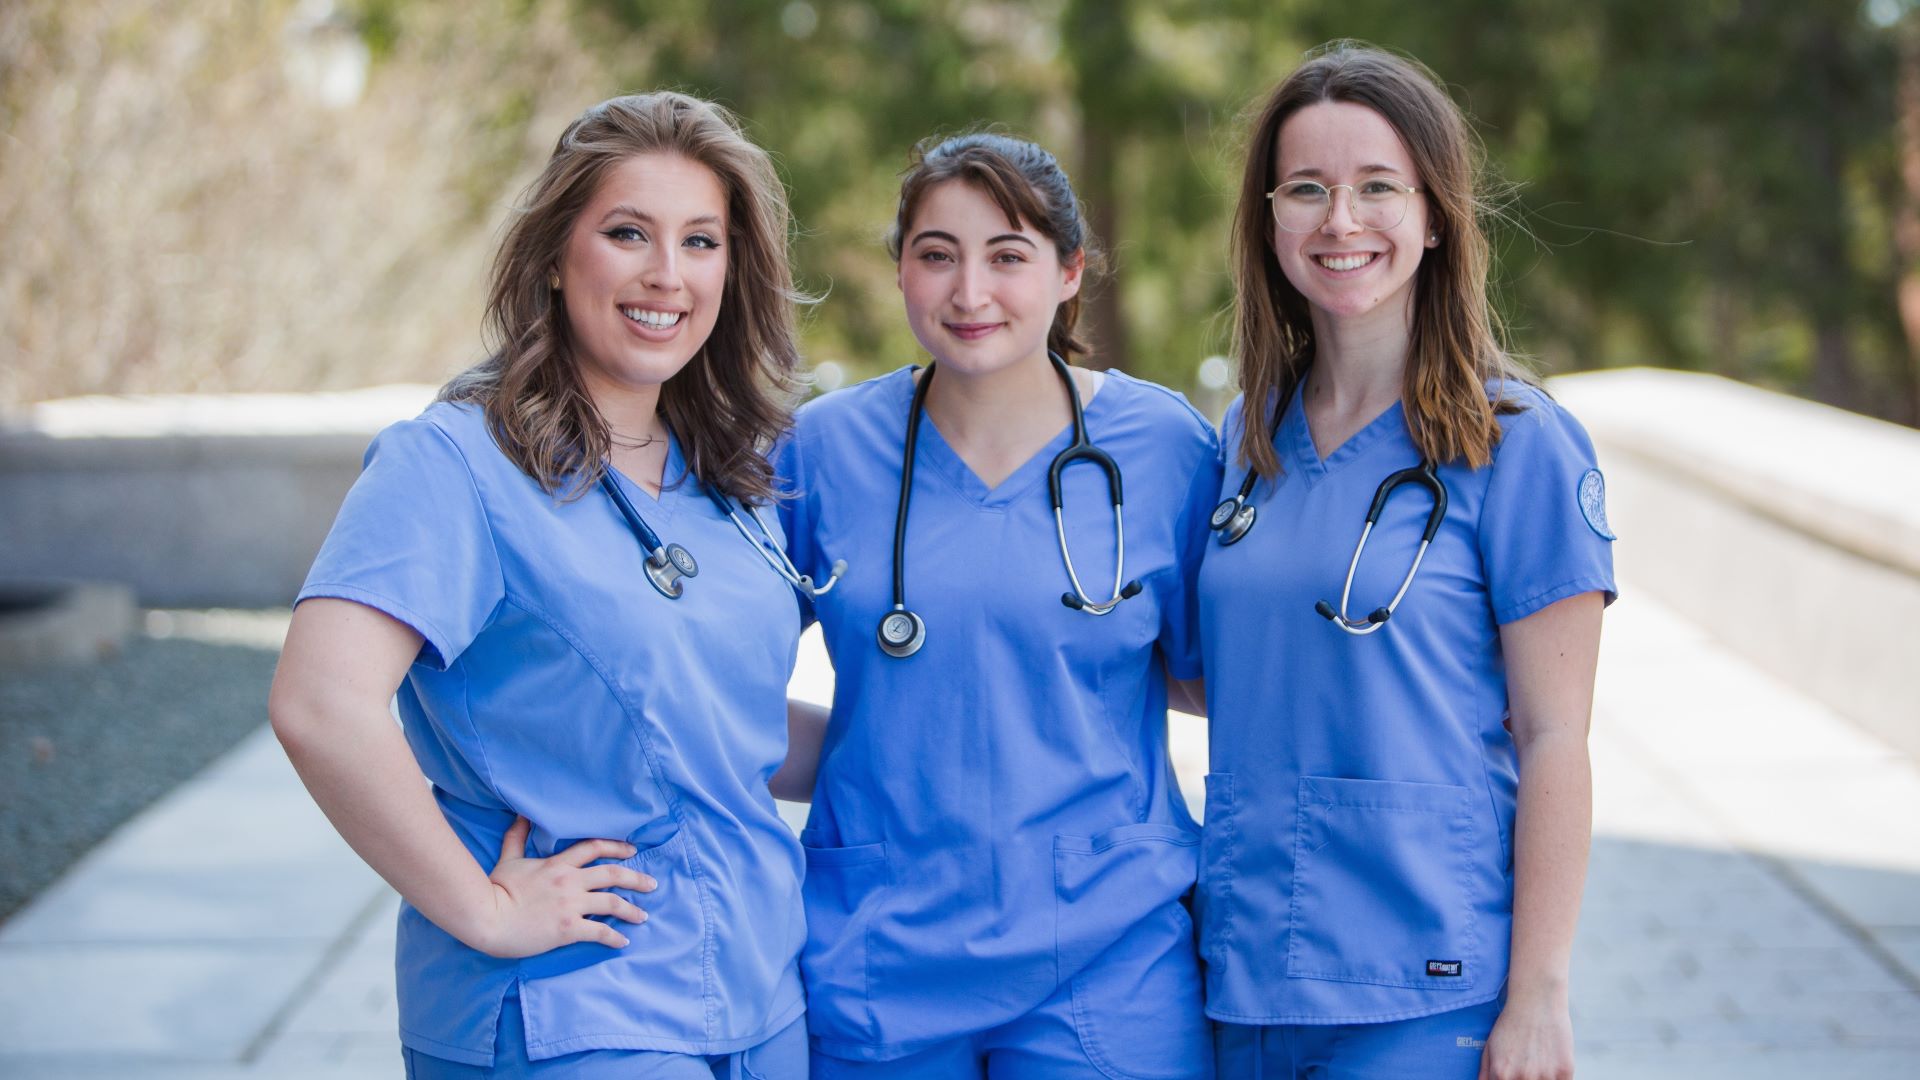 As COVID-19 surged, so did the number of nursing students preparing to enter the fight